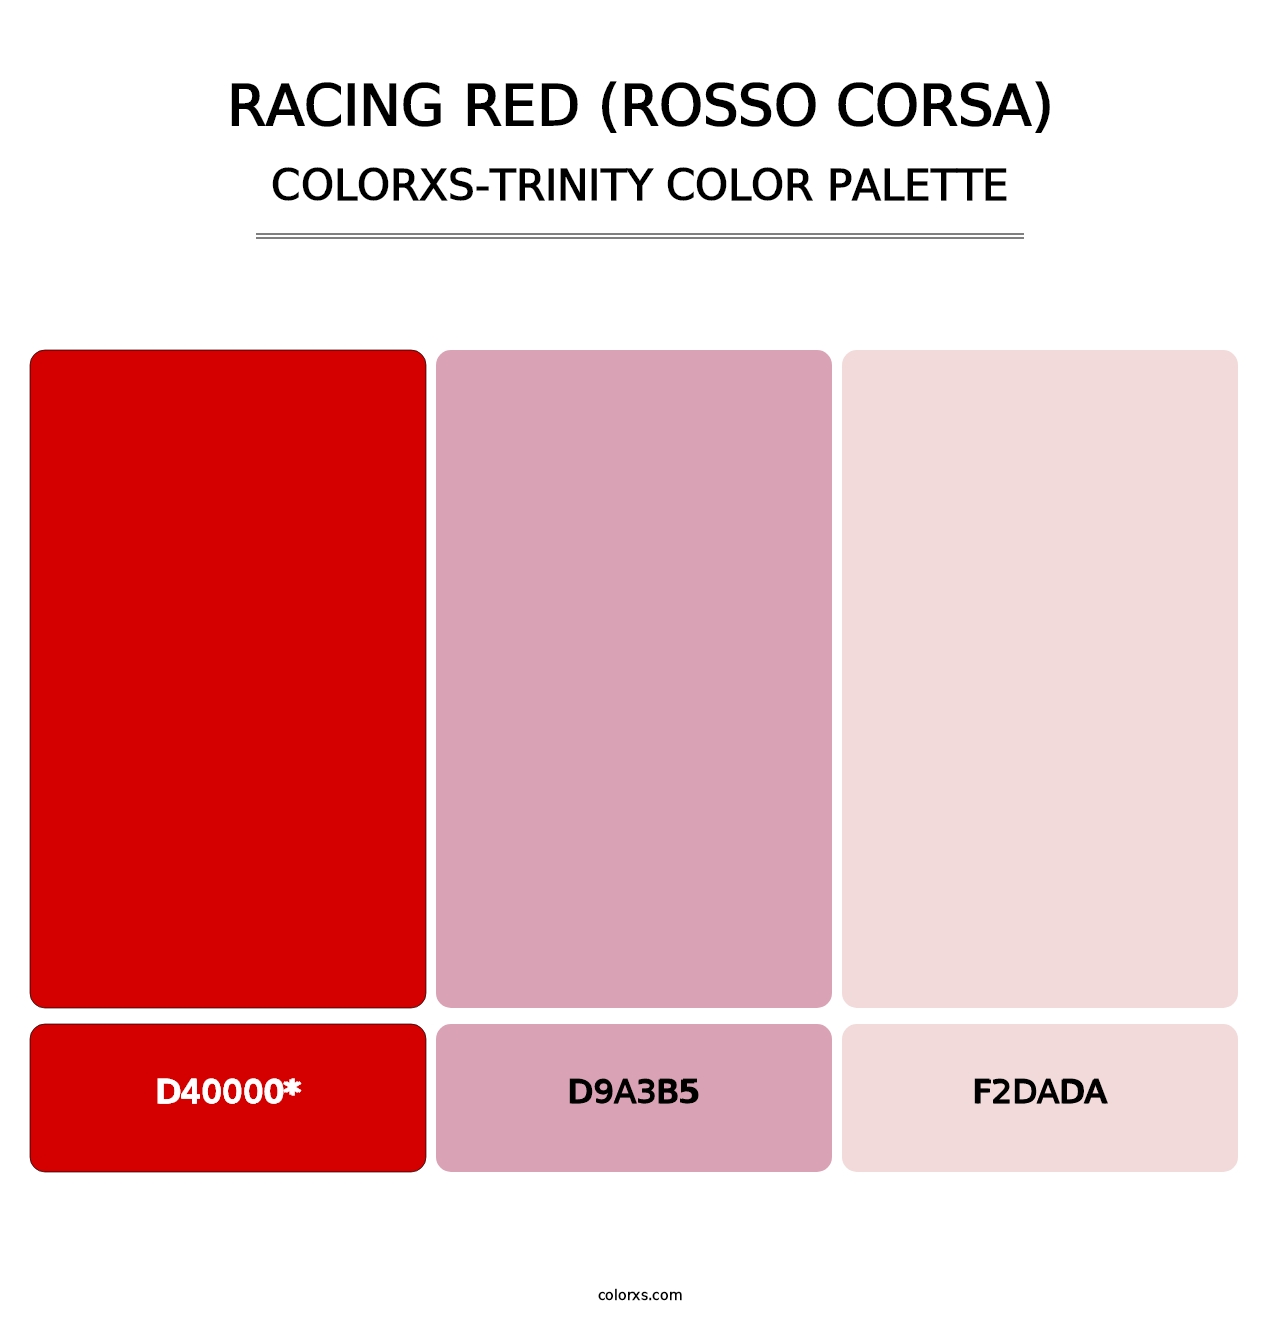 Racing Red (Rosso Corsa) - Colorxs Trinity Palette